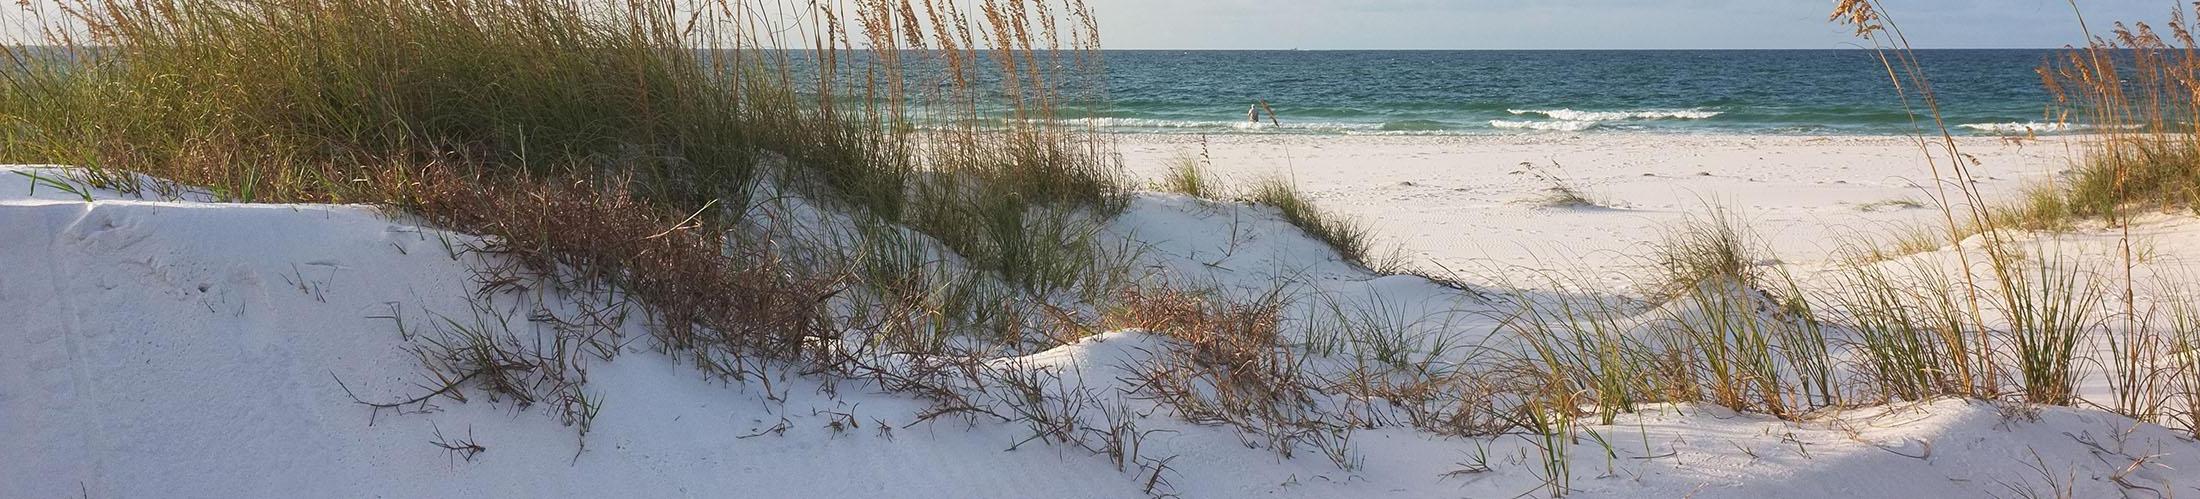 Gulf Shores Beach, a short drive from our gulf coast college.